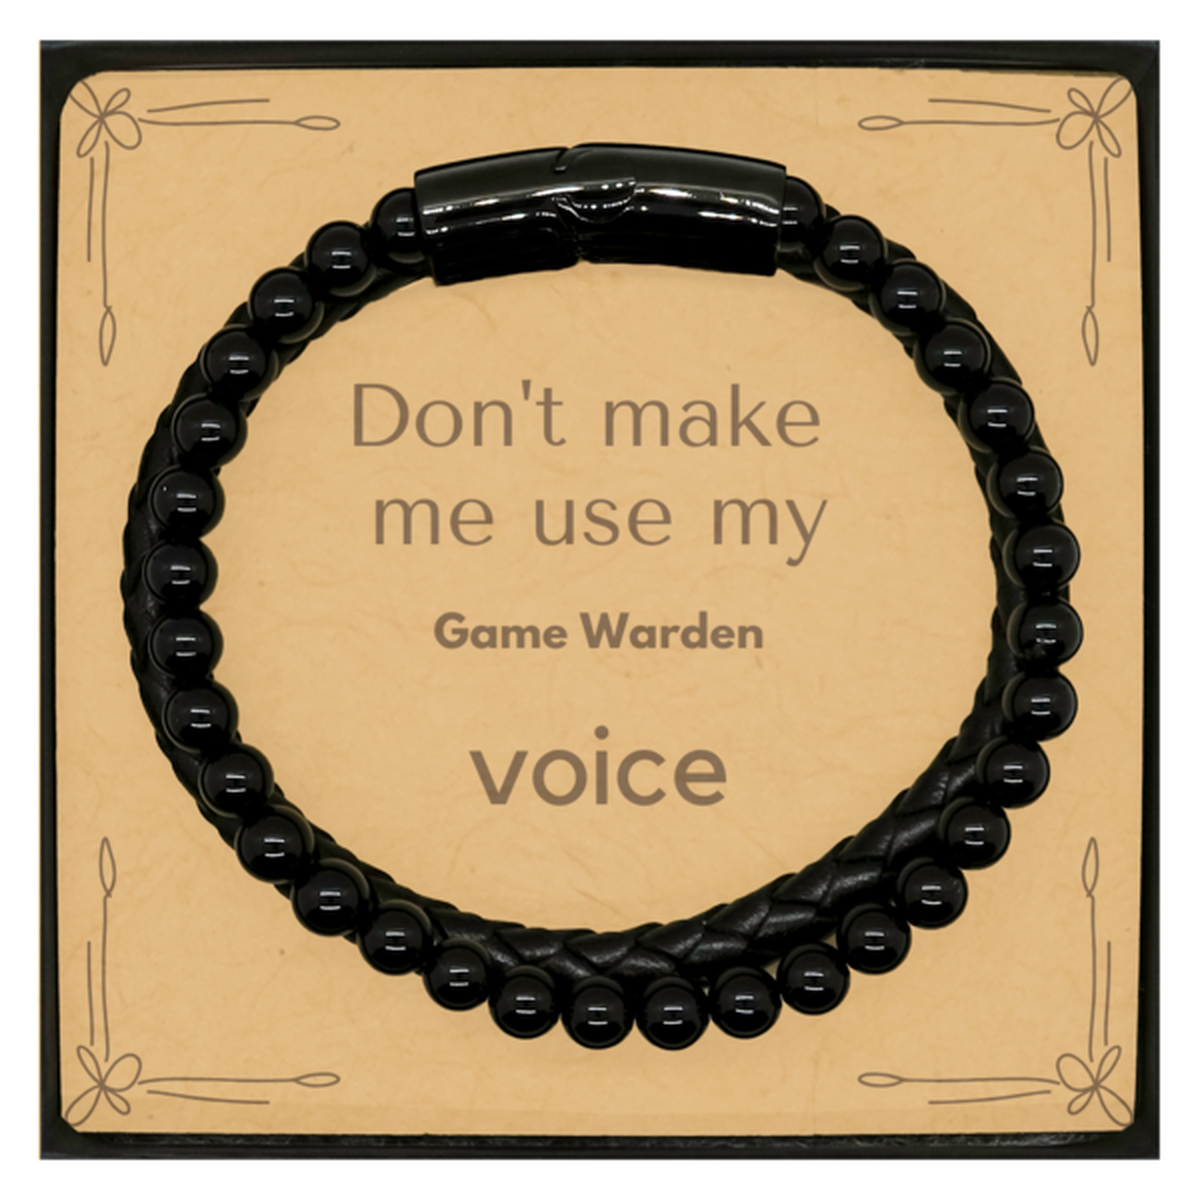 Don't make me use my Game Warden voice, Sarcasm Game Warden Card Gifts, Christmas Game Warden Stone Leather Bracelets Birthday Unique Gifts For Game Warden Coworkers, Men, Women, Colleague, Friends